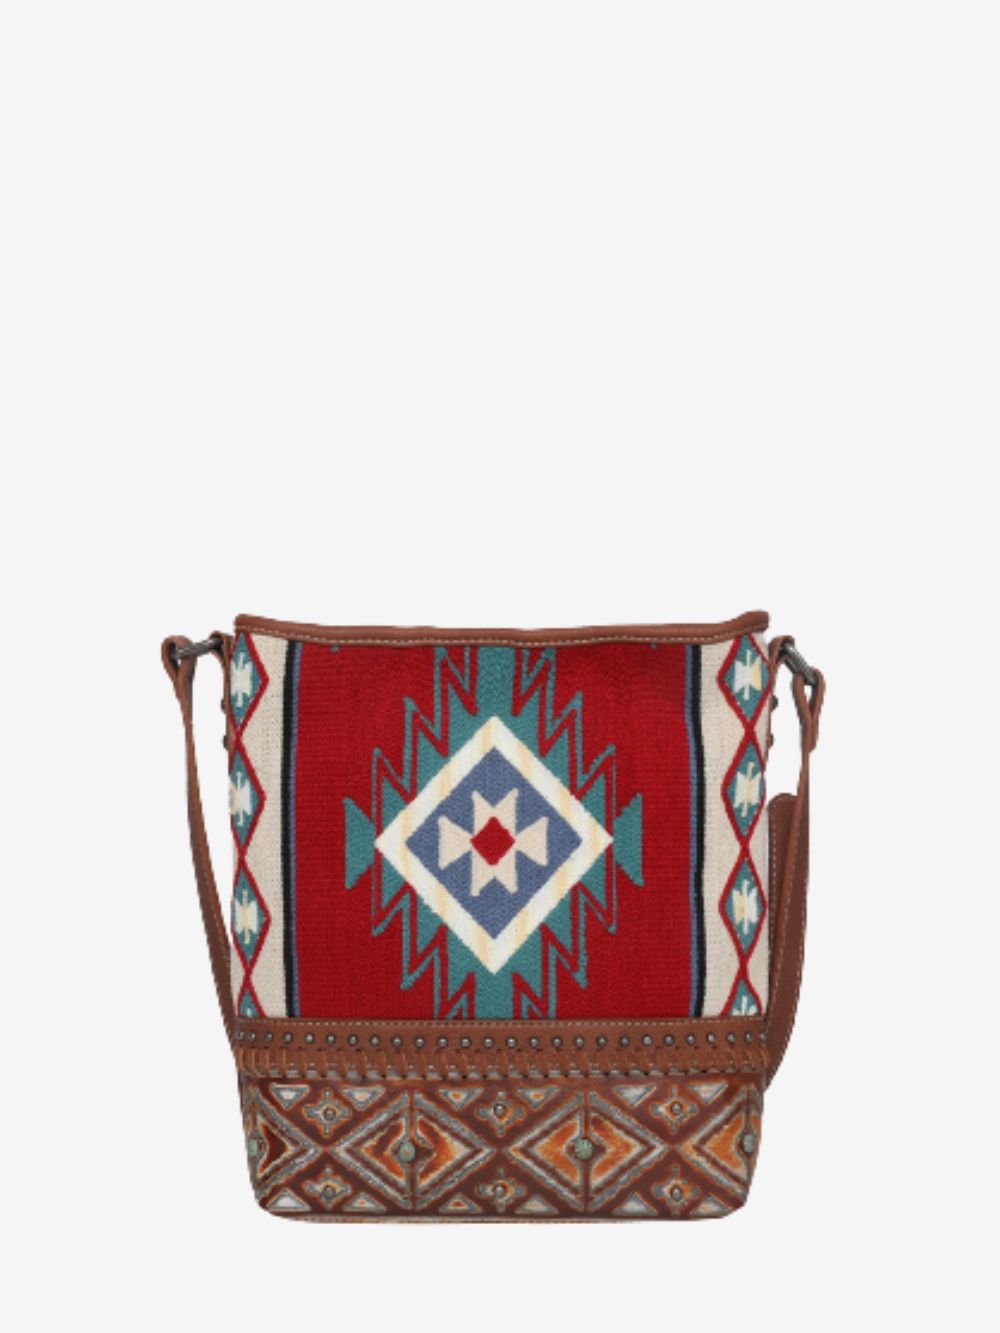 Montana West Aztec Tapestry Concealed Carry Crossbody - Montana West World